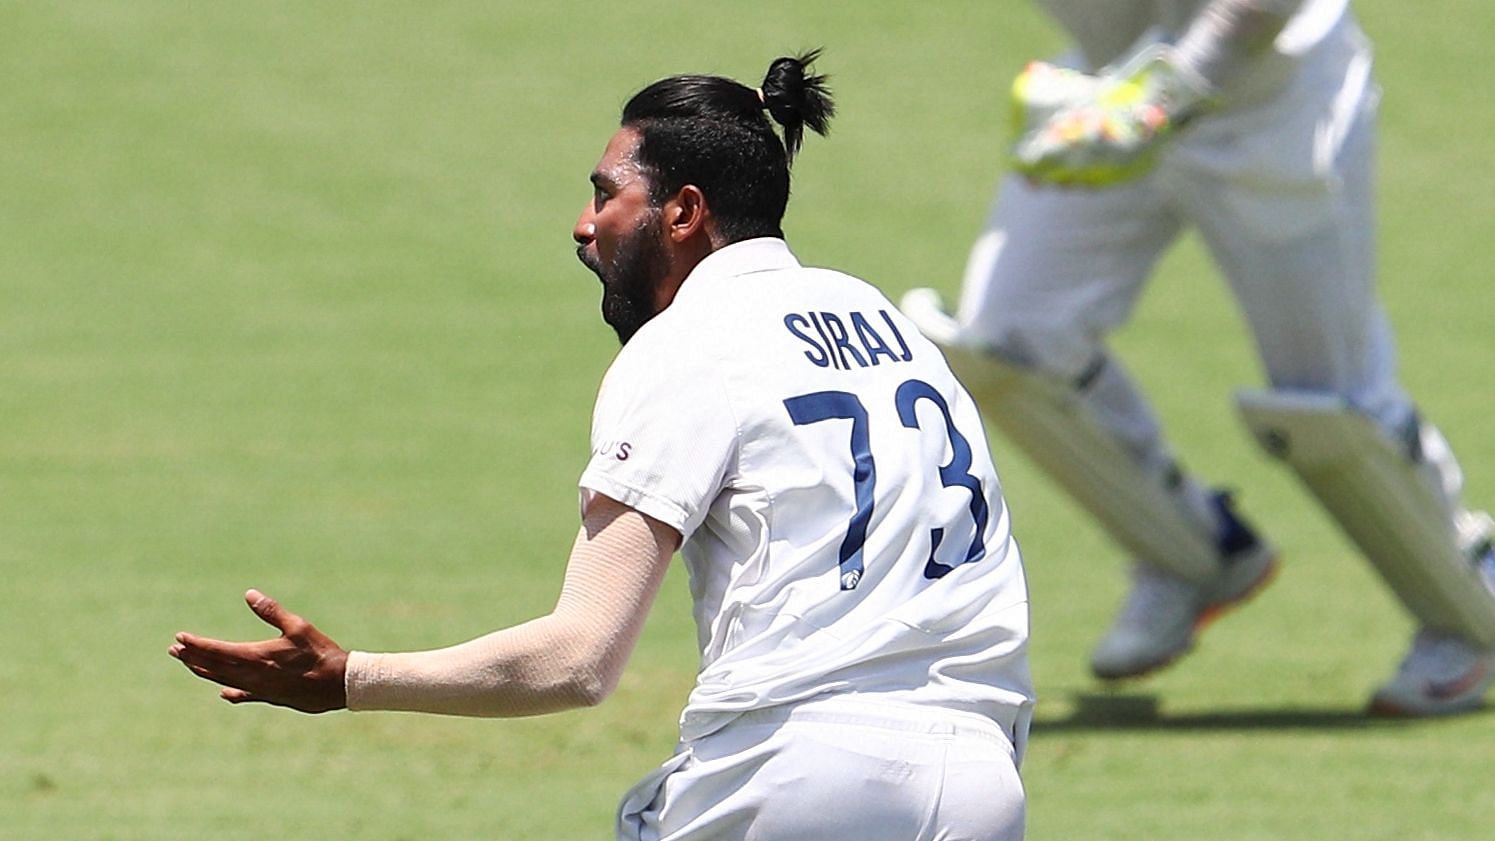 Mohammed Siraj celebrates a wicket on Day 4 at the Gabba